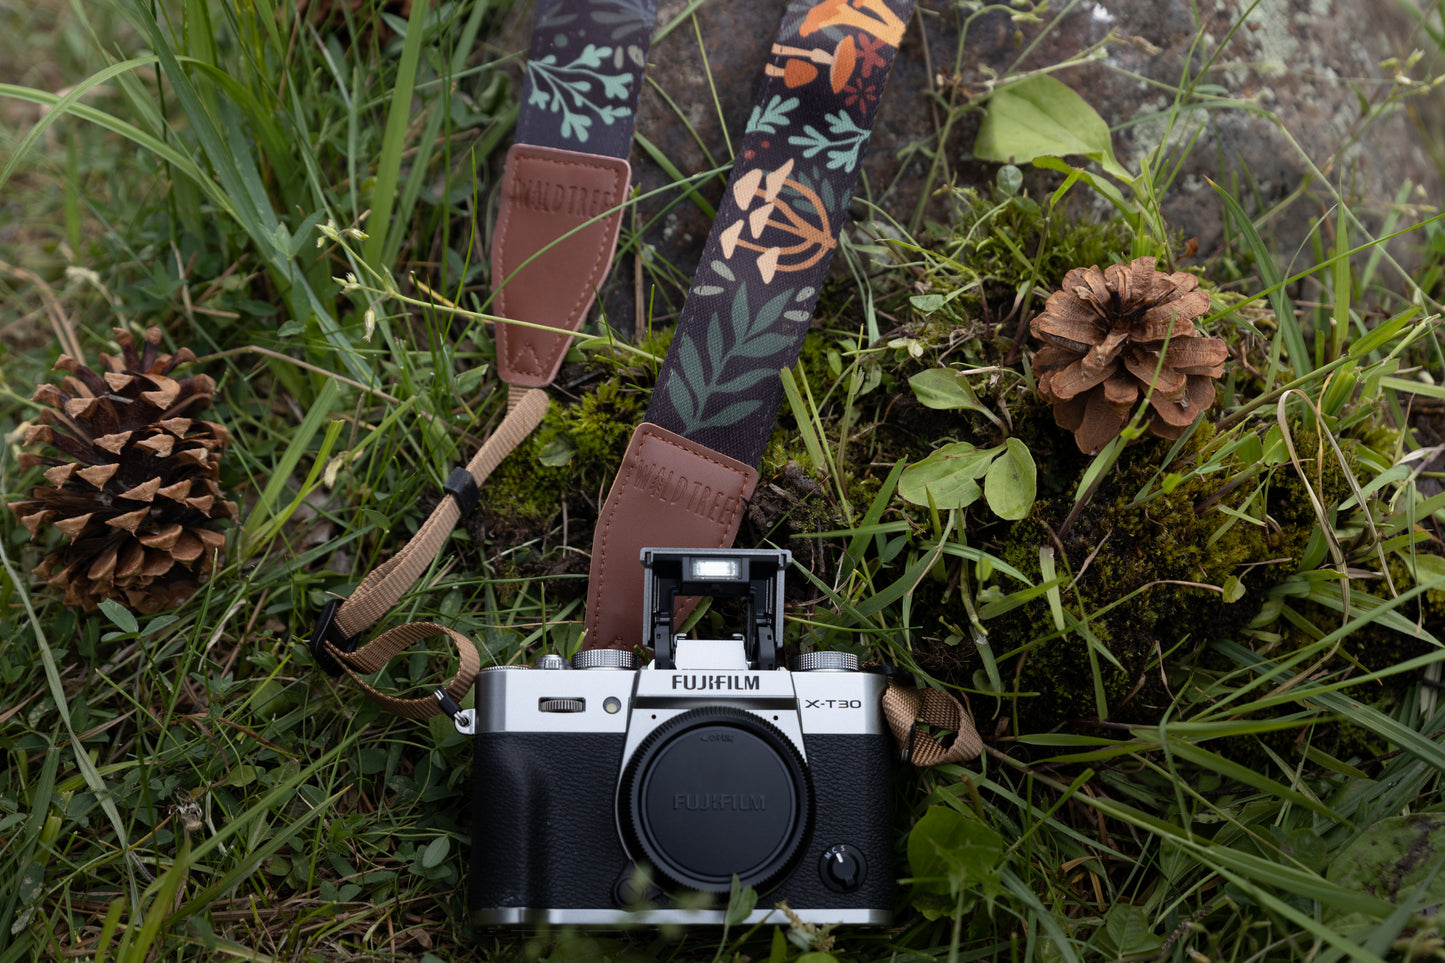 wildtree's forest foliage designed camera strap laying on rocks and moss connected to fujifilm camera